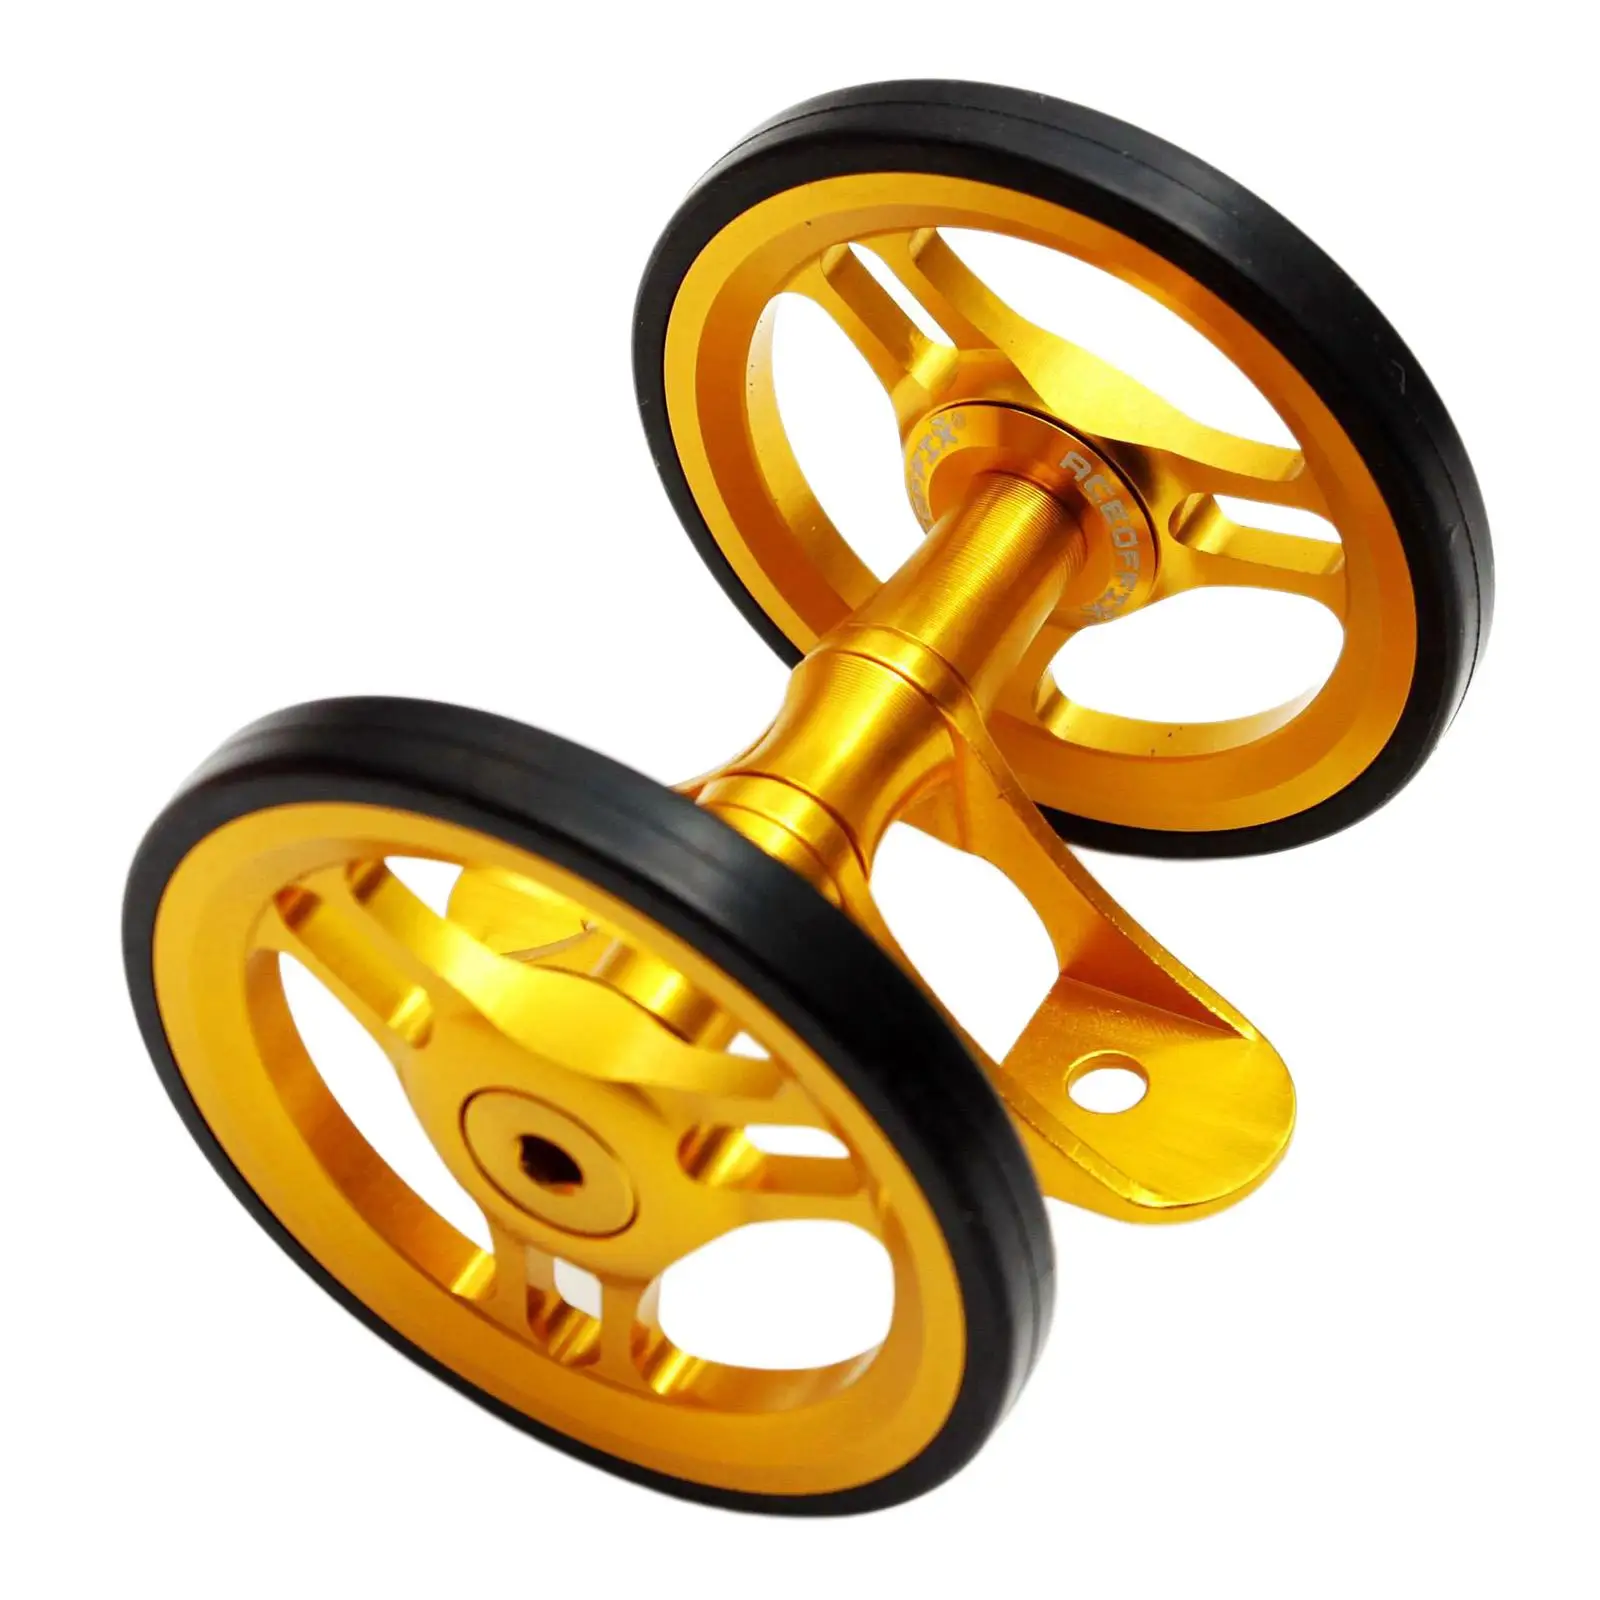 Folding Bike Accessories Diameter 60mm for Sports Outdoors